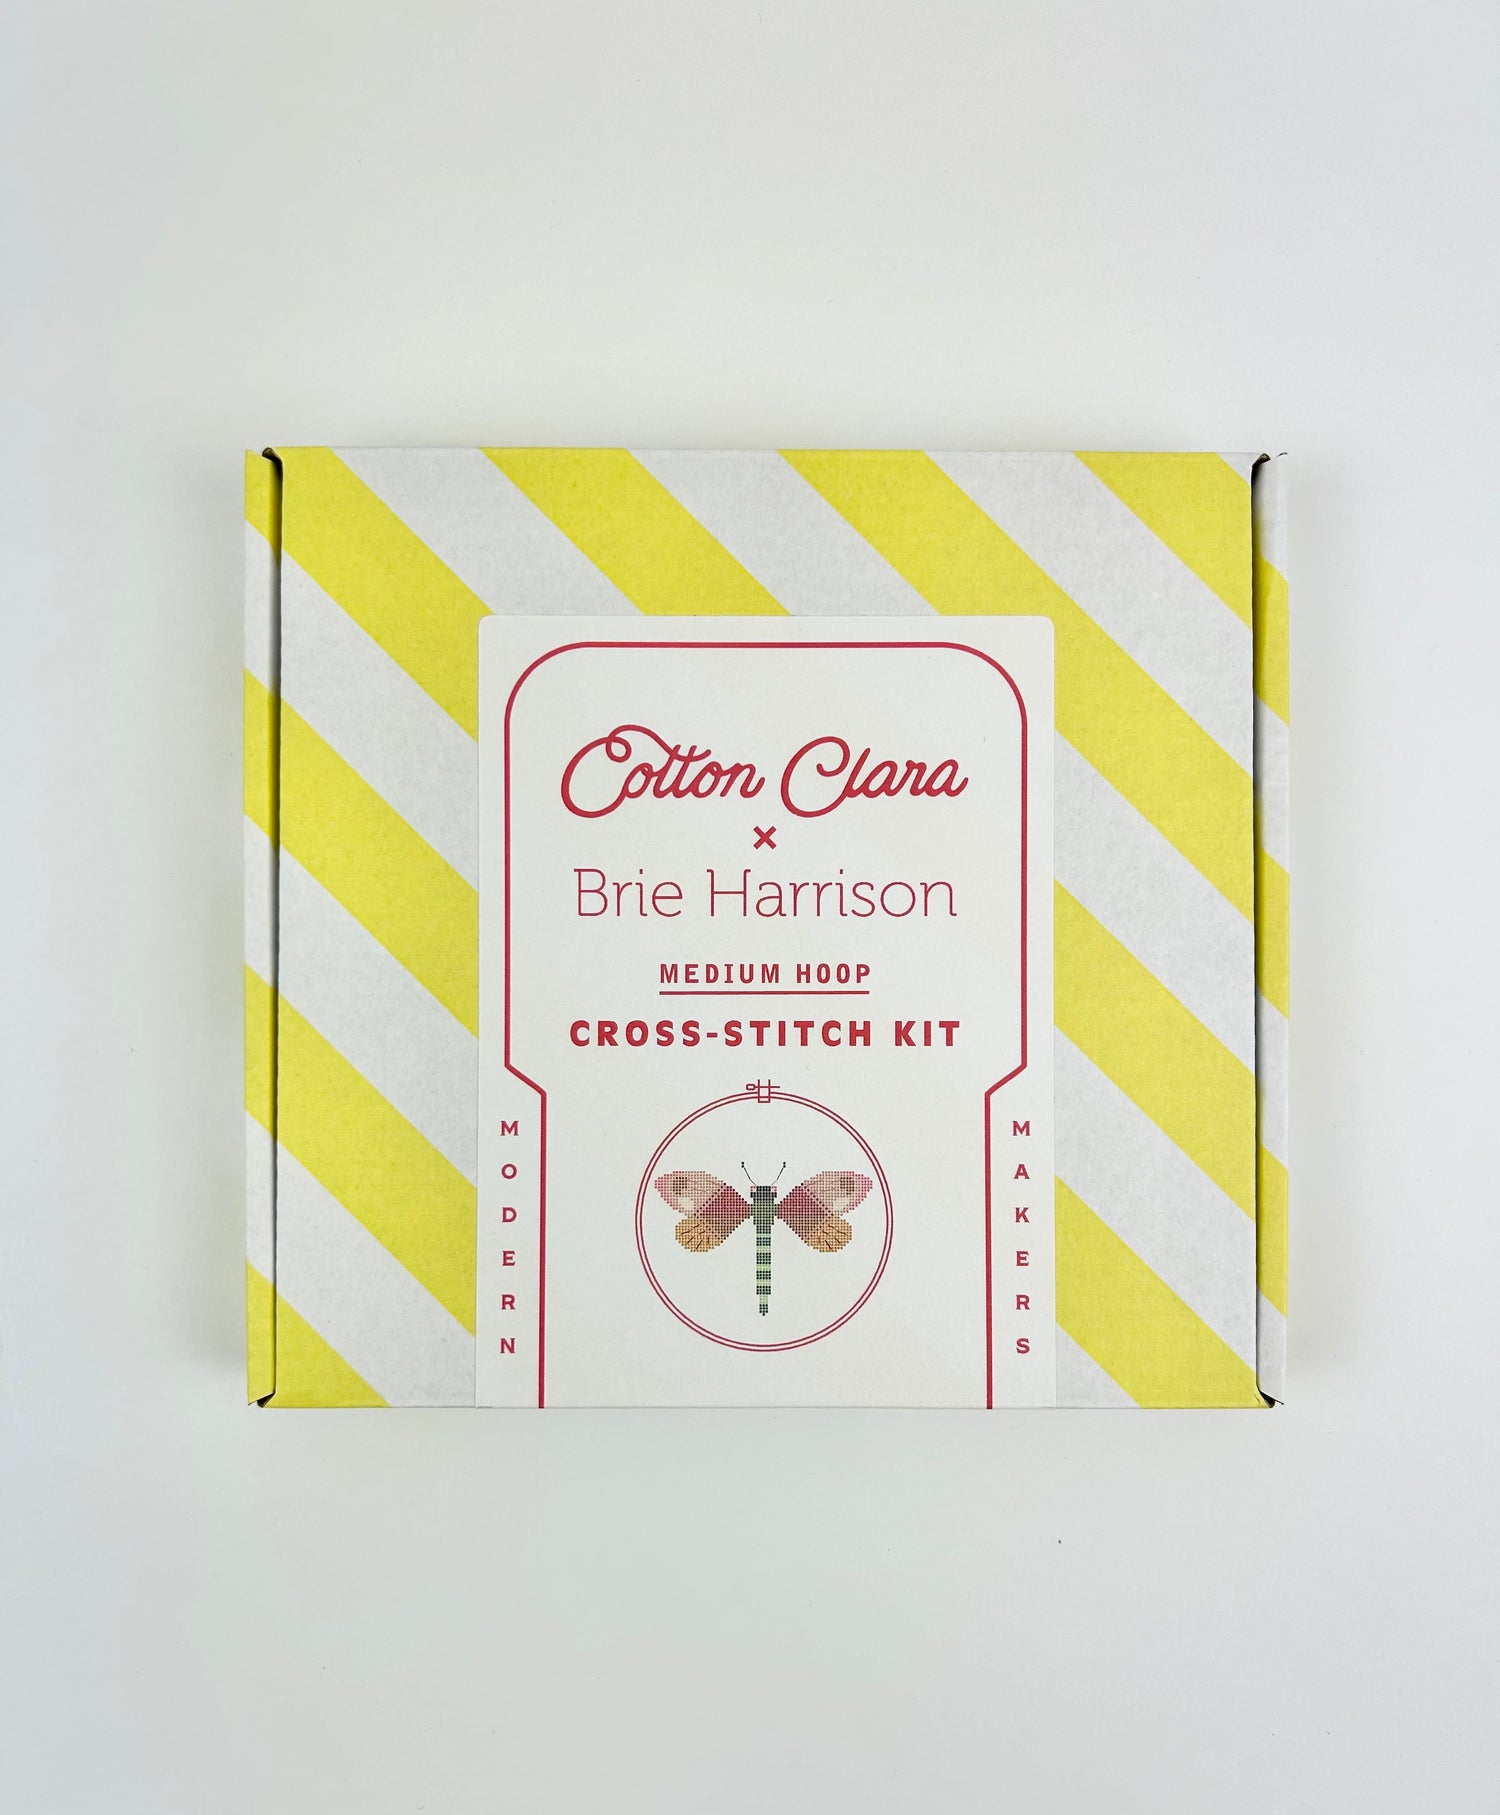 Dragonfly Brie Harrison Cross Stitch Kit Fun & Games in  at Wrapsody